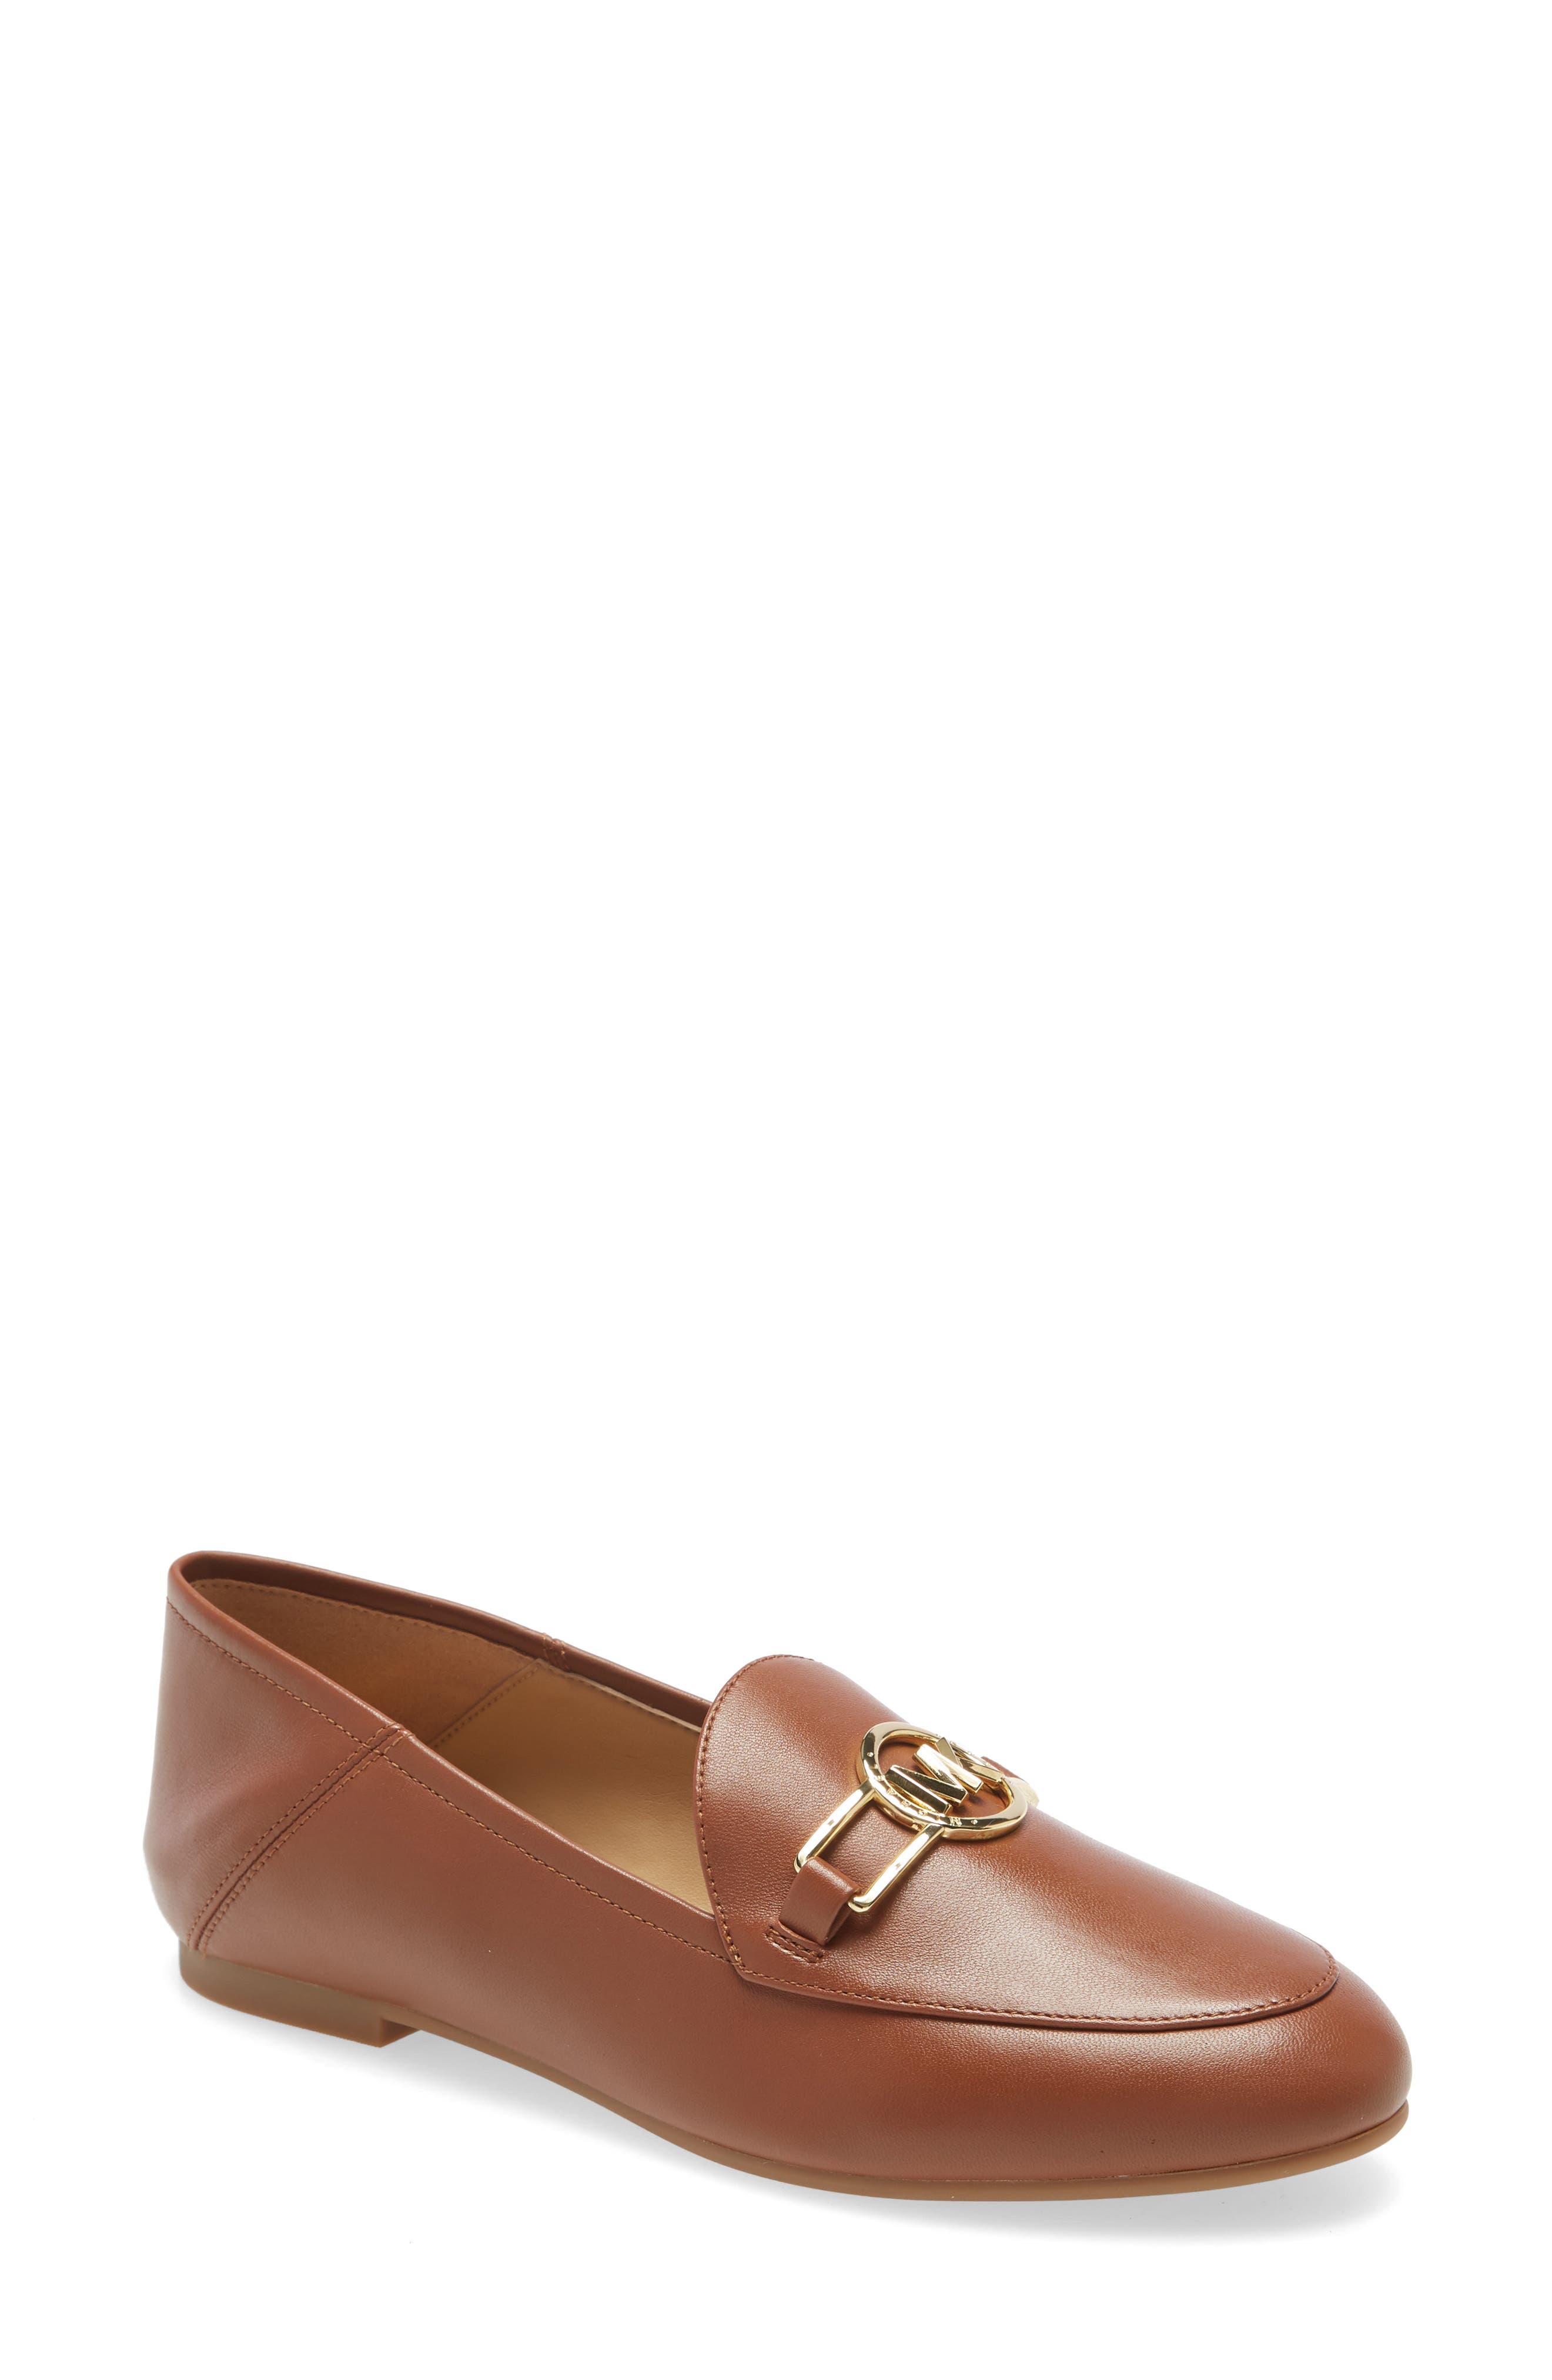 michael kors loafers womens for sale